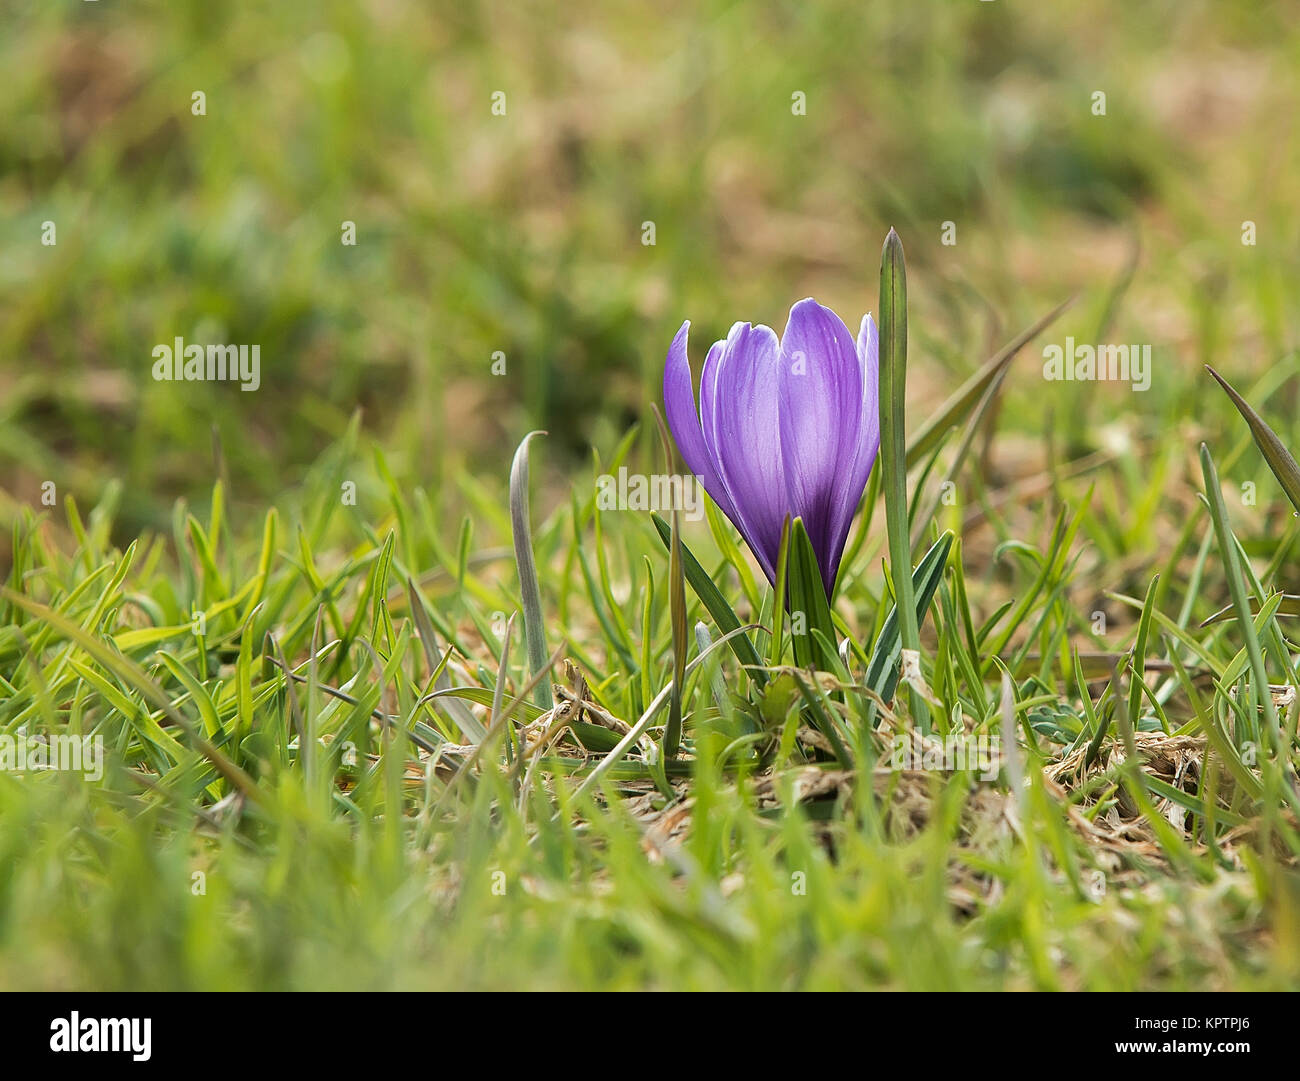 Flowering crocus in close-up name individually and in group Stock Photo